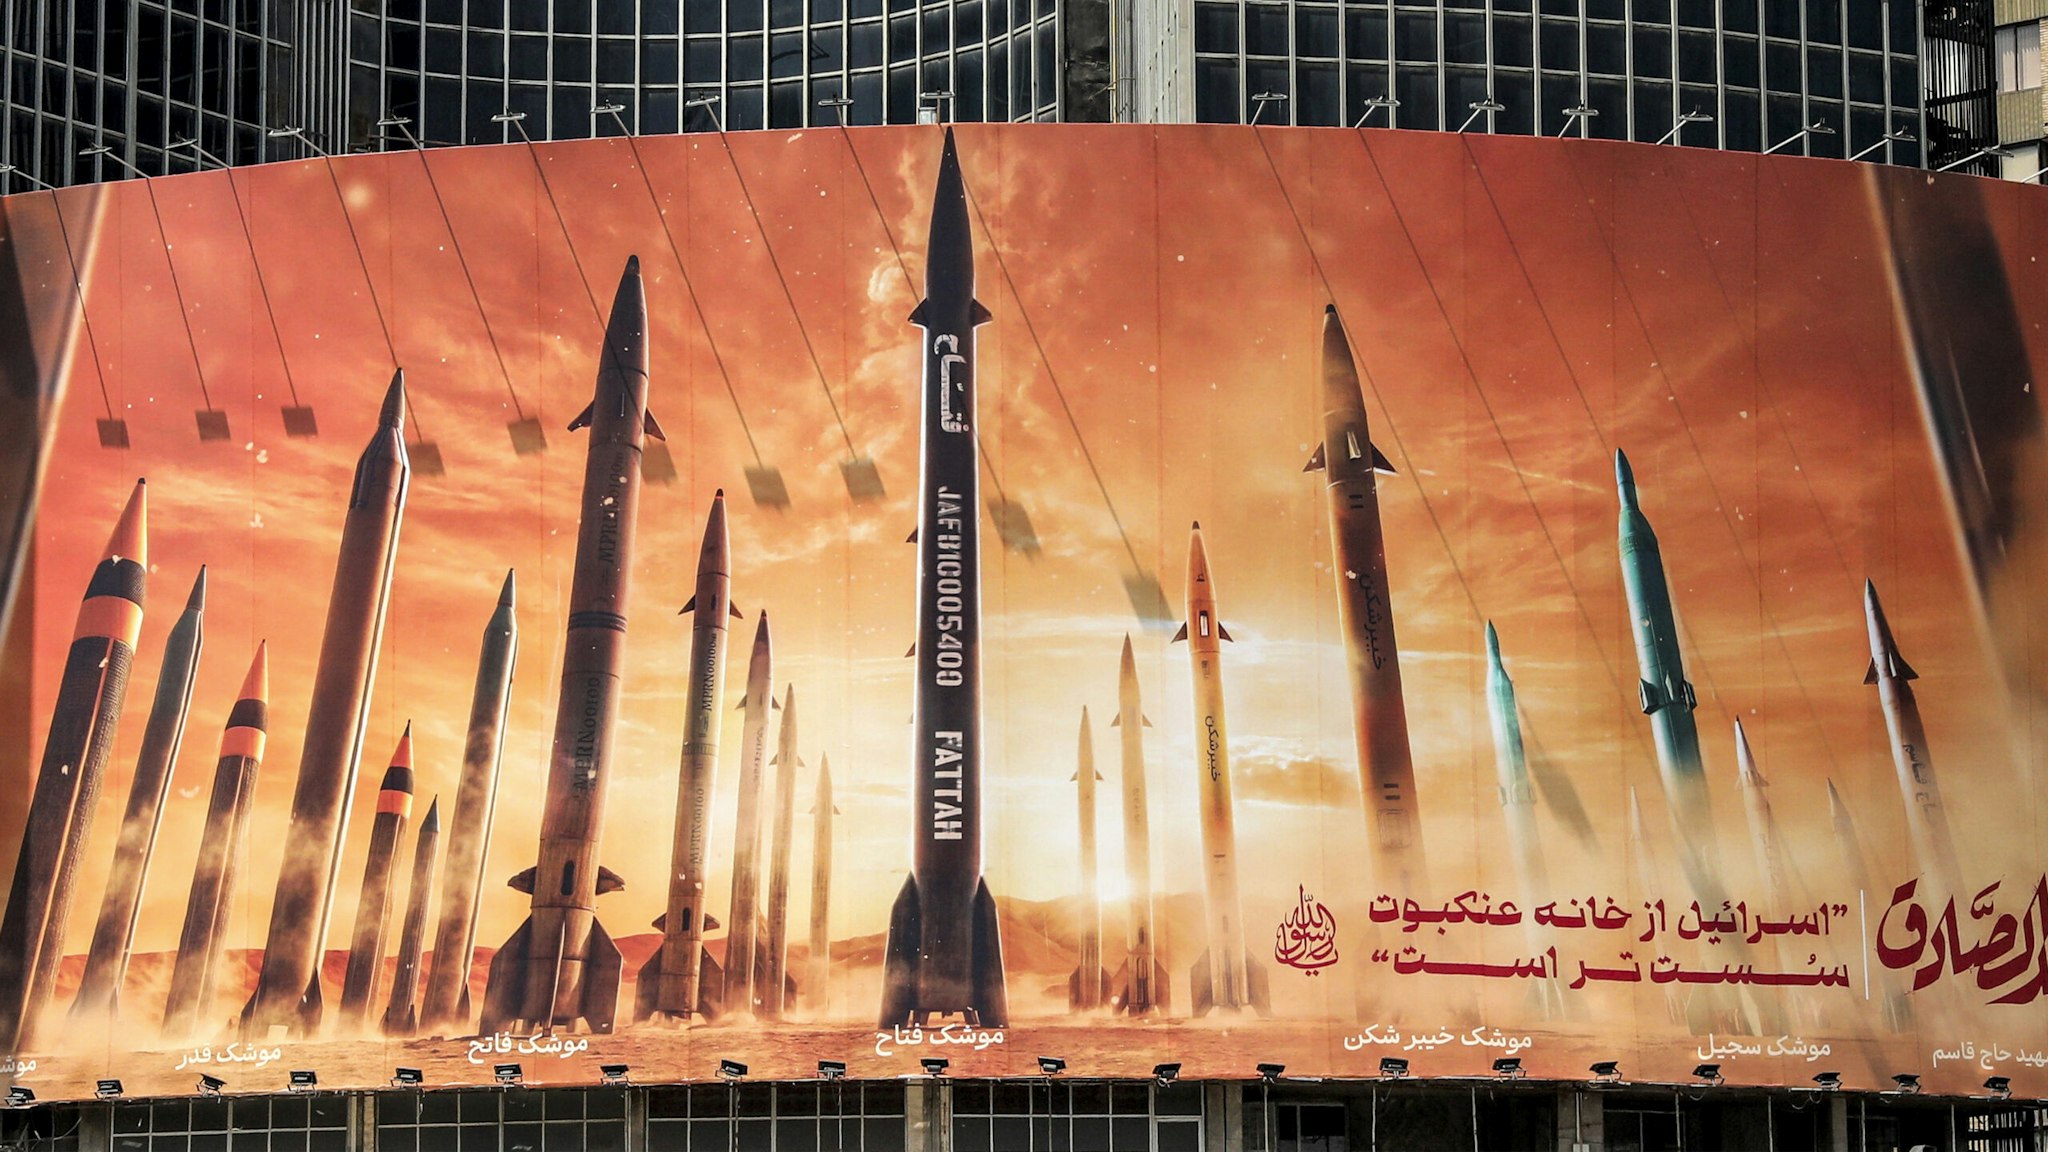 This picture taken on April 15, 2024 shows a view of a billboard depicting named Iranian ballistic missiles in service, with text in Arabic reading "the honest [person's] promise" and in Persian "Israel is weaker than a spider's web", in Valiasr Square in central Tehran. Iran on April 14 urged Israel not to retaliate militarily to an unprecedented attack overnight, which Tehran presented as a justified response to a deadly strike on its consulate building in Damascus.